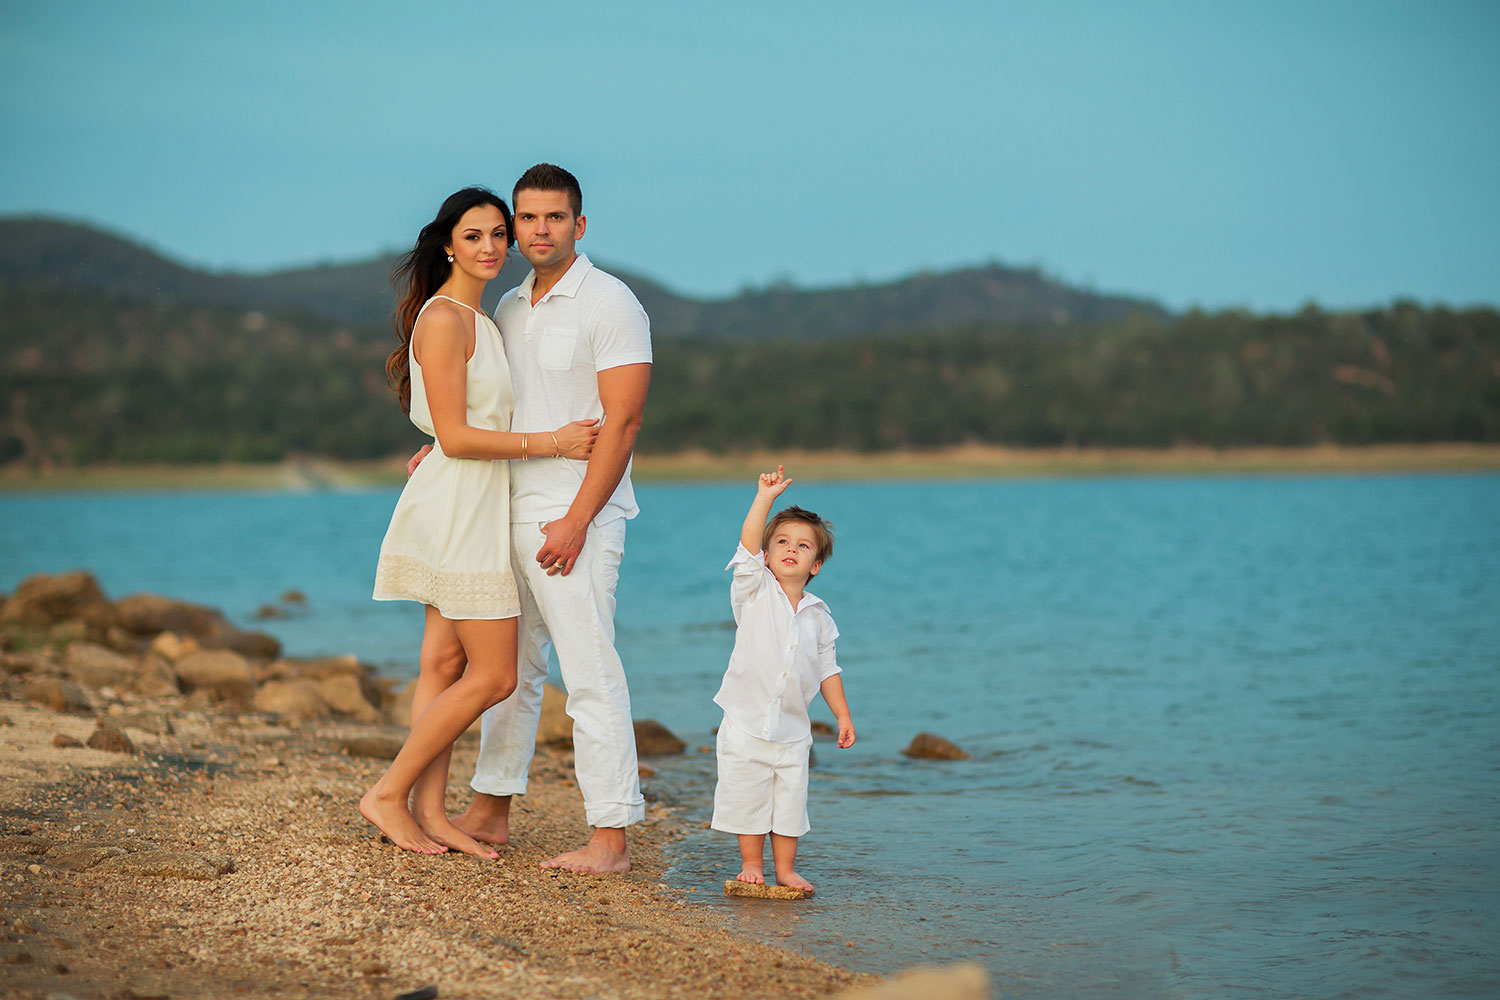 20 Best Family Photo Outfits for an Indoor or Outdoor Photoshoot